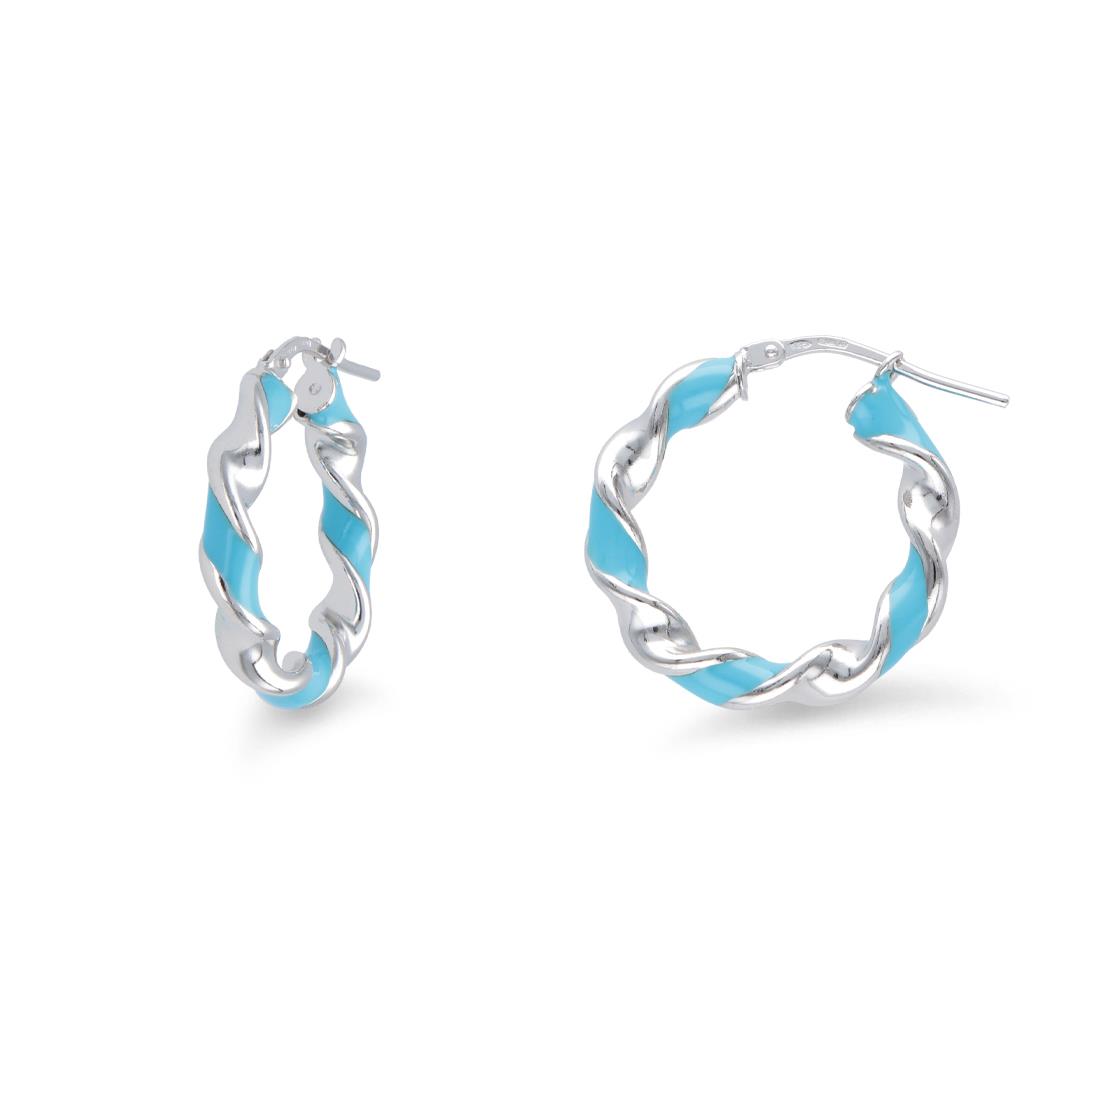 Hula Hoop collection torchon hoop earrings in rhodium-plated 925 silver with blue enamel - LUXURY MILANO